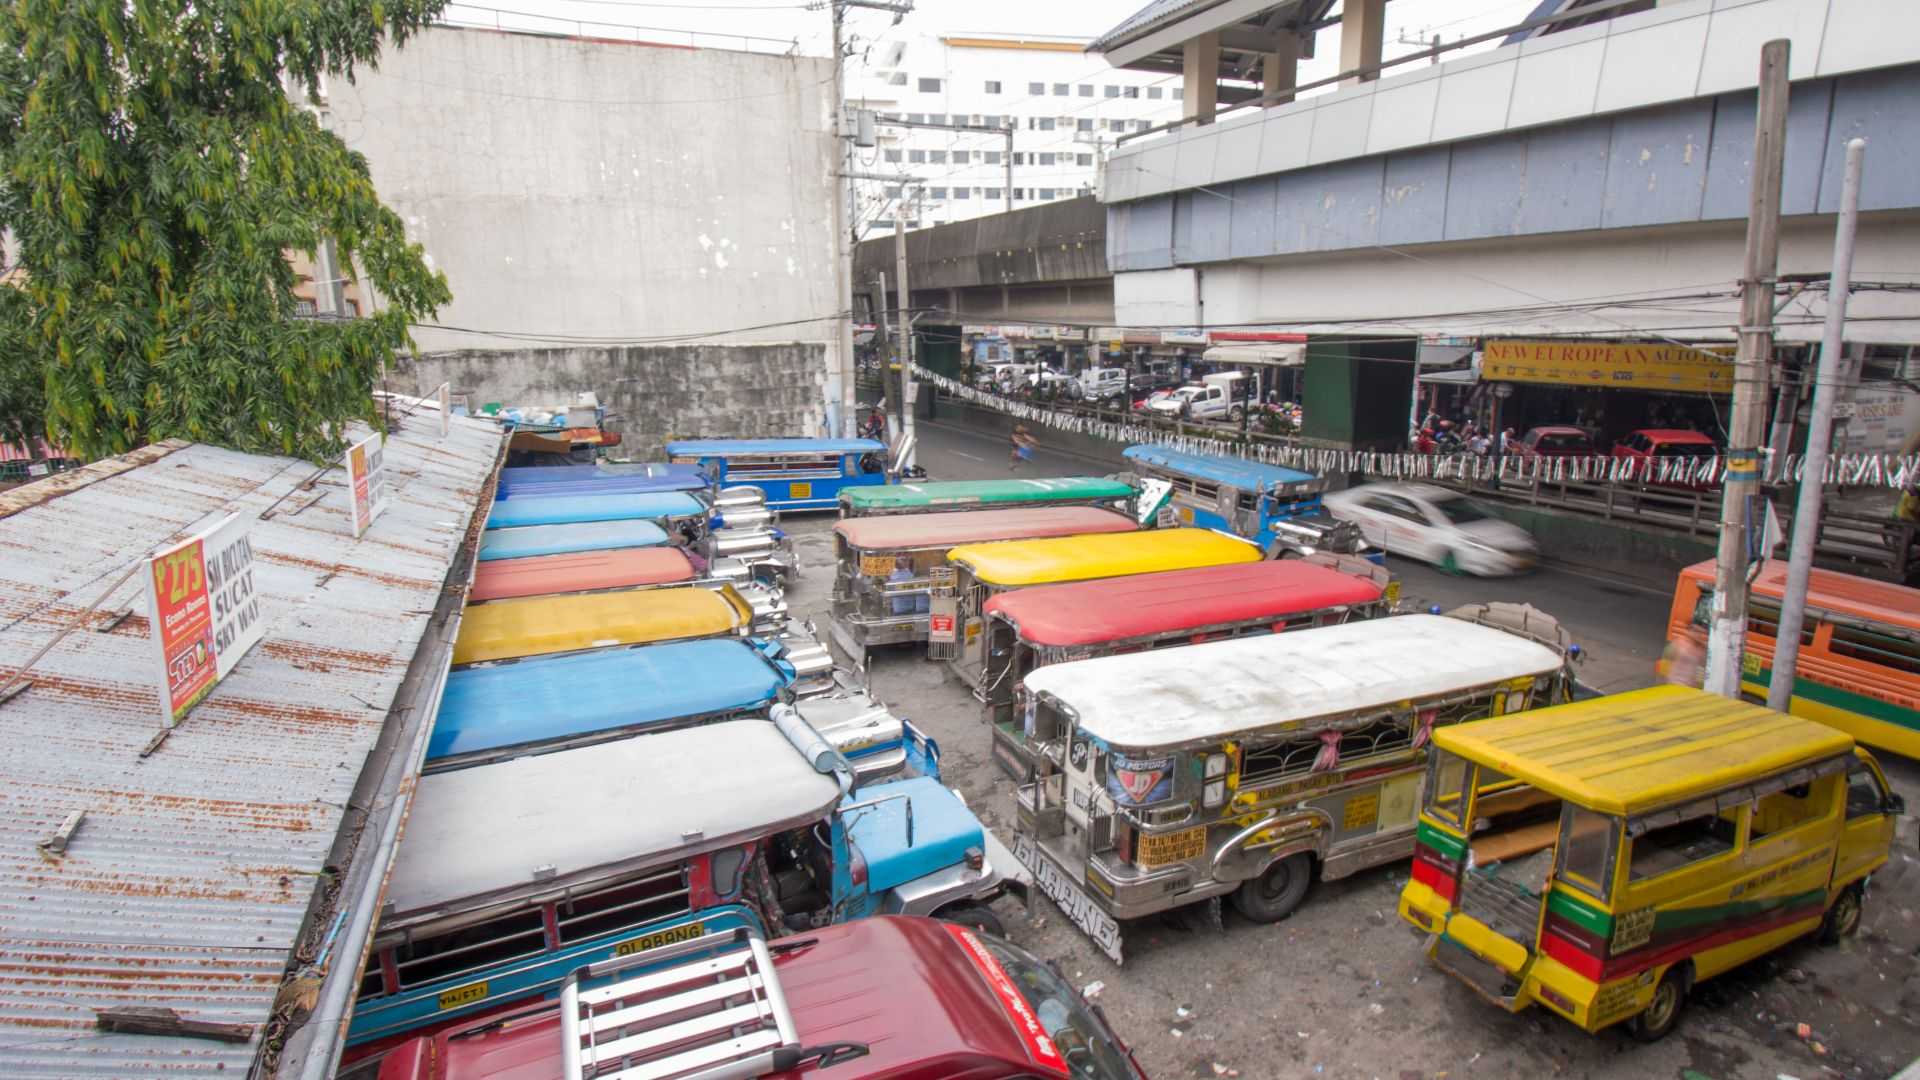 LTFRB, PISTON settle on relaxing consolidation requirements